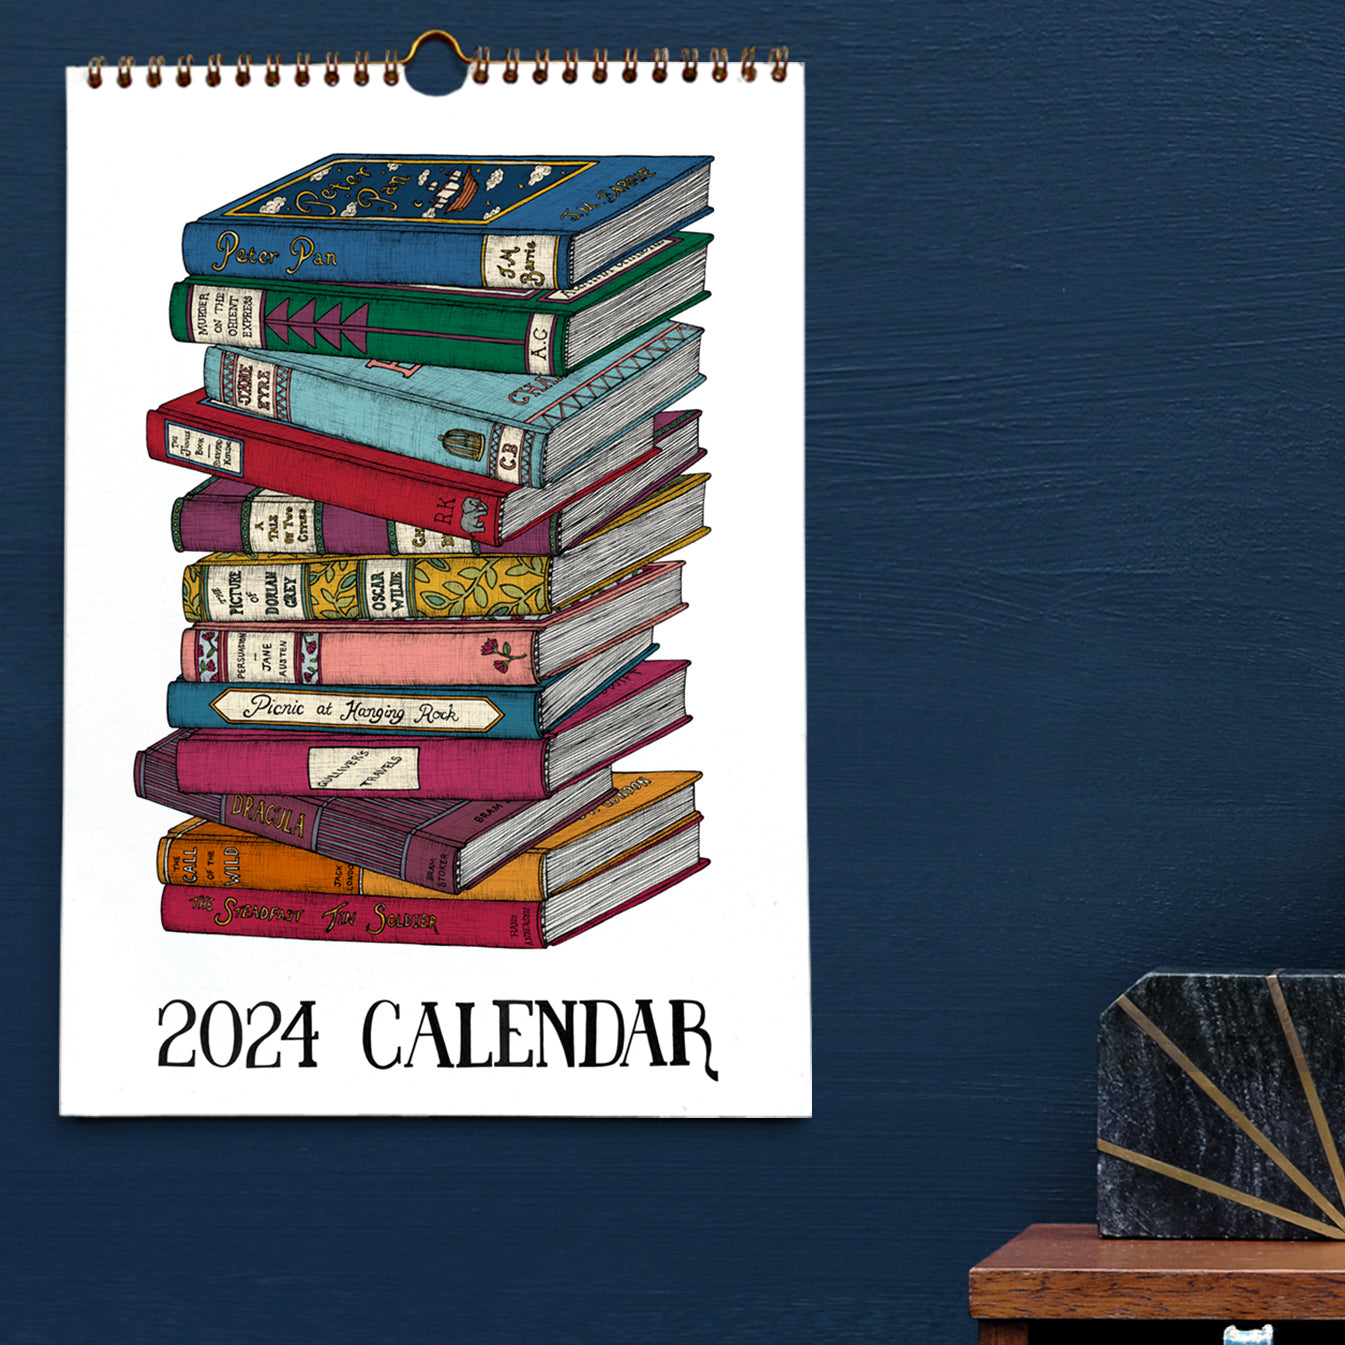 Why, where and how to buy a 2024 artist calendar